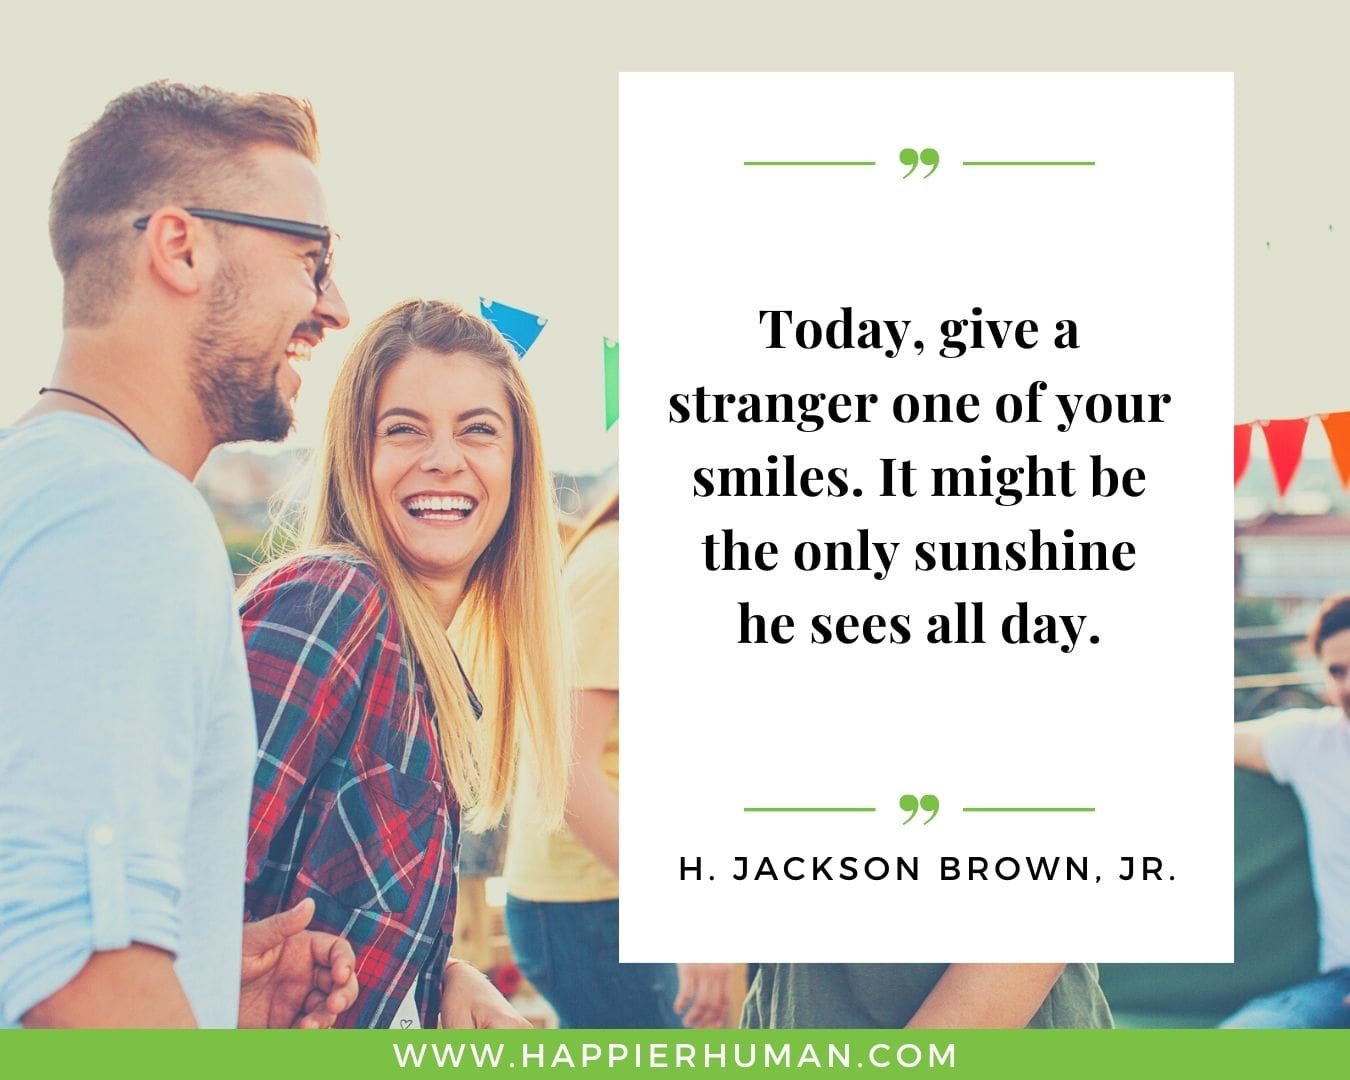 Great Day Quotes - “Today, give a stranger one of your smiles. It might be the only sunshine he sees all day.” – H. Jackson Brown, Jr.